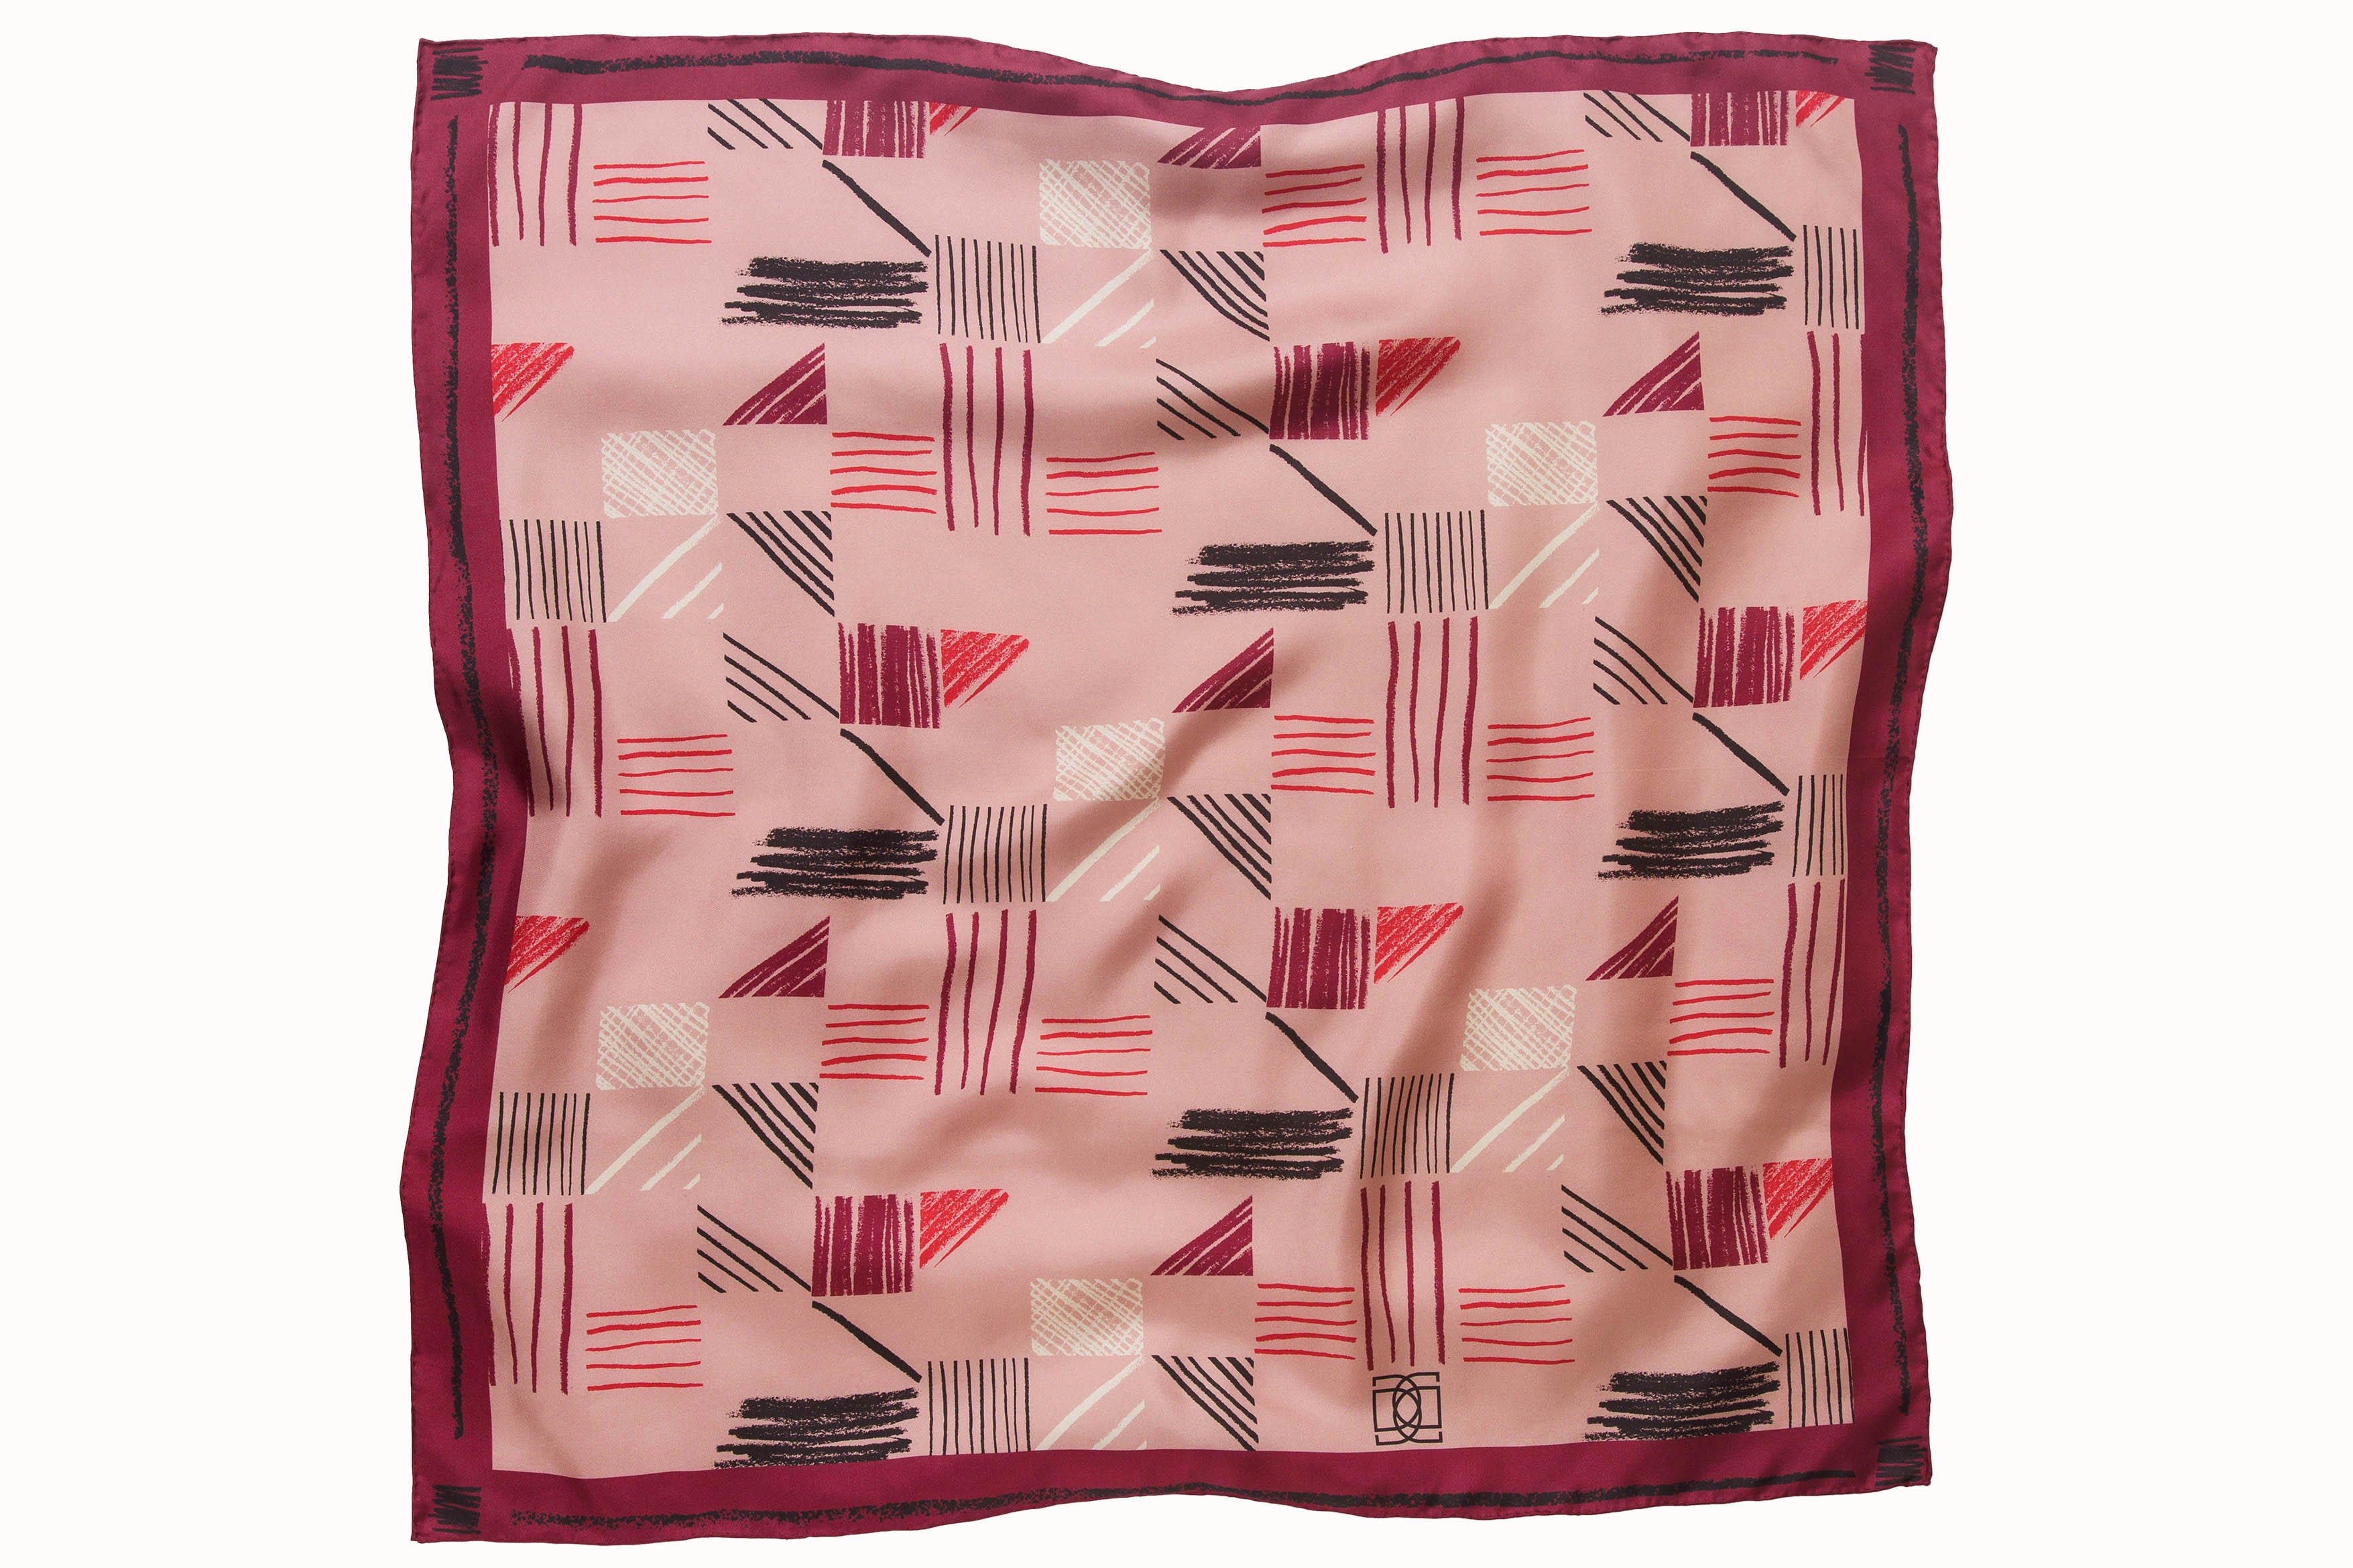 Flatlay image of 100% silk square scarf featuring a motif of charcoal, cherry, raspberry and cream colored imperfect lines making geometric rectangle and triangle shapes throughout the scarf. Blush pink background and rich berry colored border on the scarf.